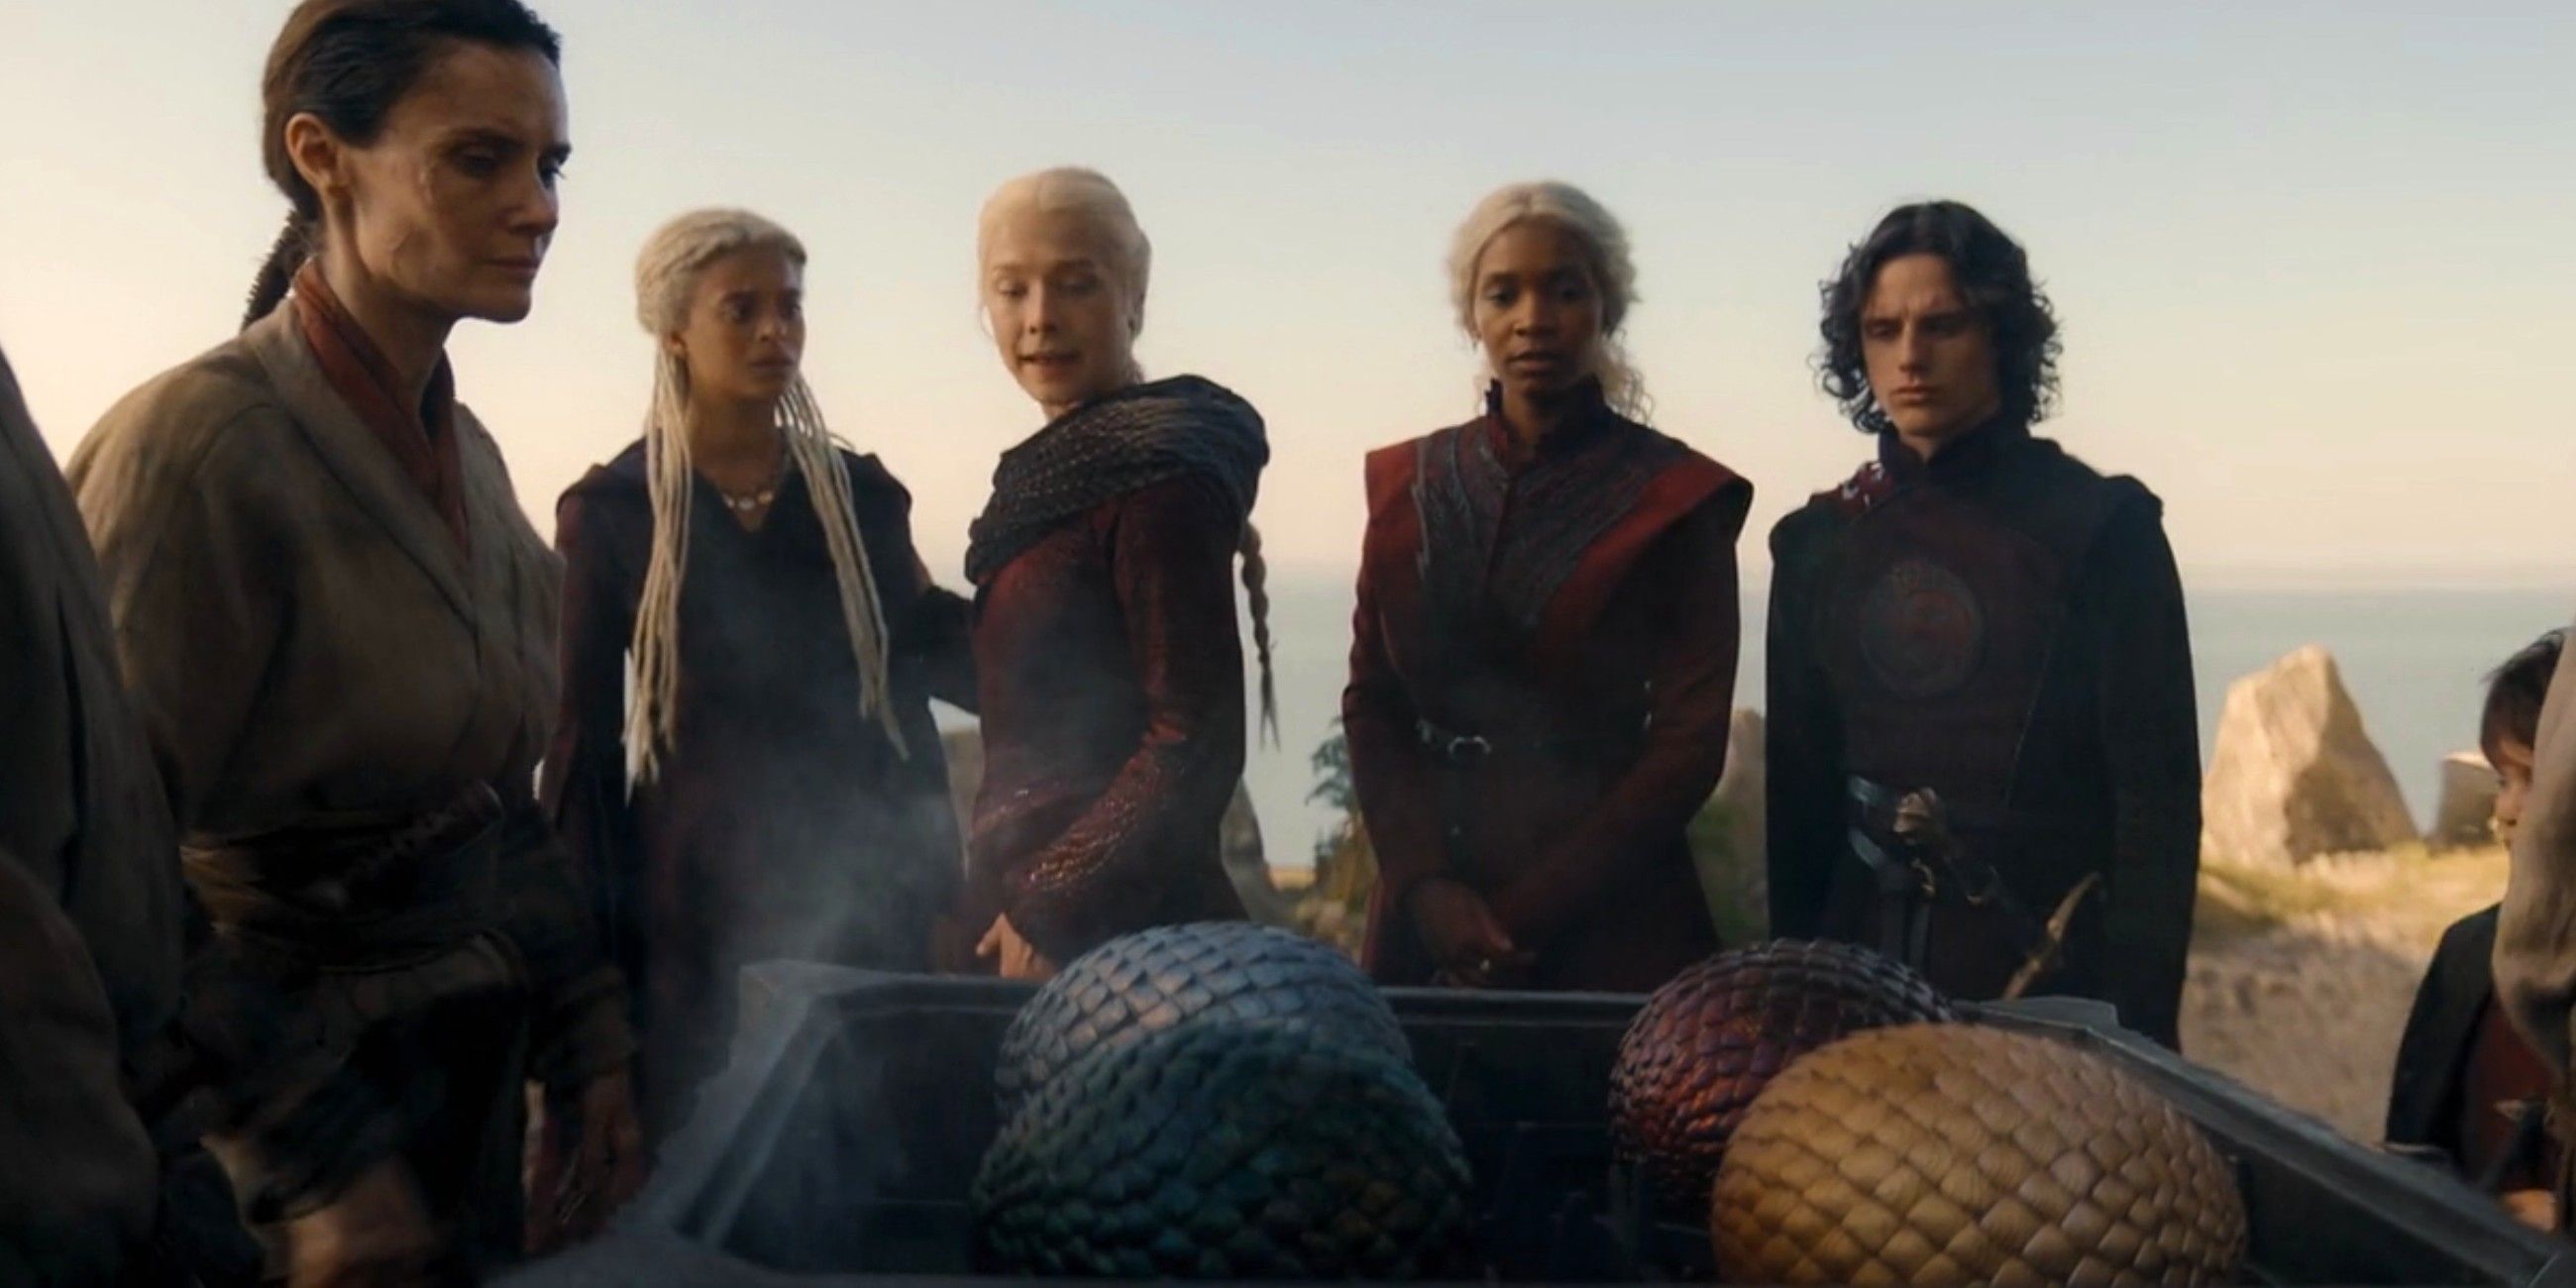 Rhaena, Rhaenyra, Baela, and Jacaerys standing in front of a clutch of dragon eggs in House of the Dragon season 2, episode 3